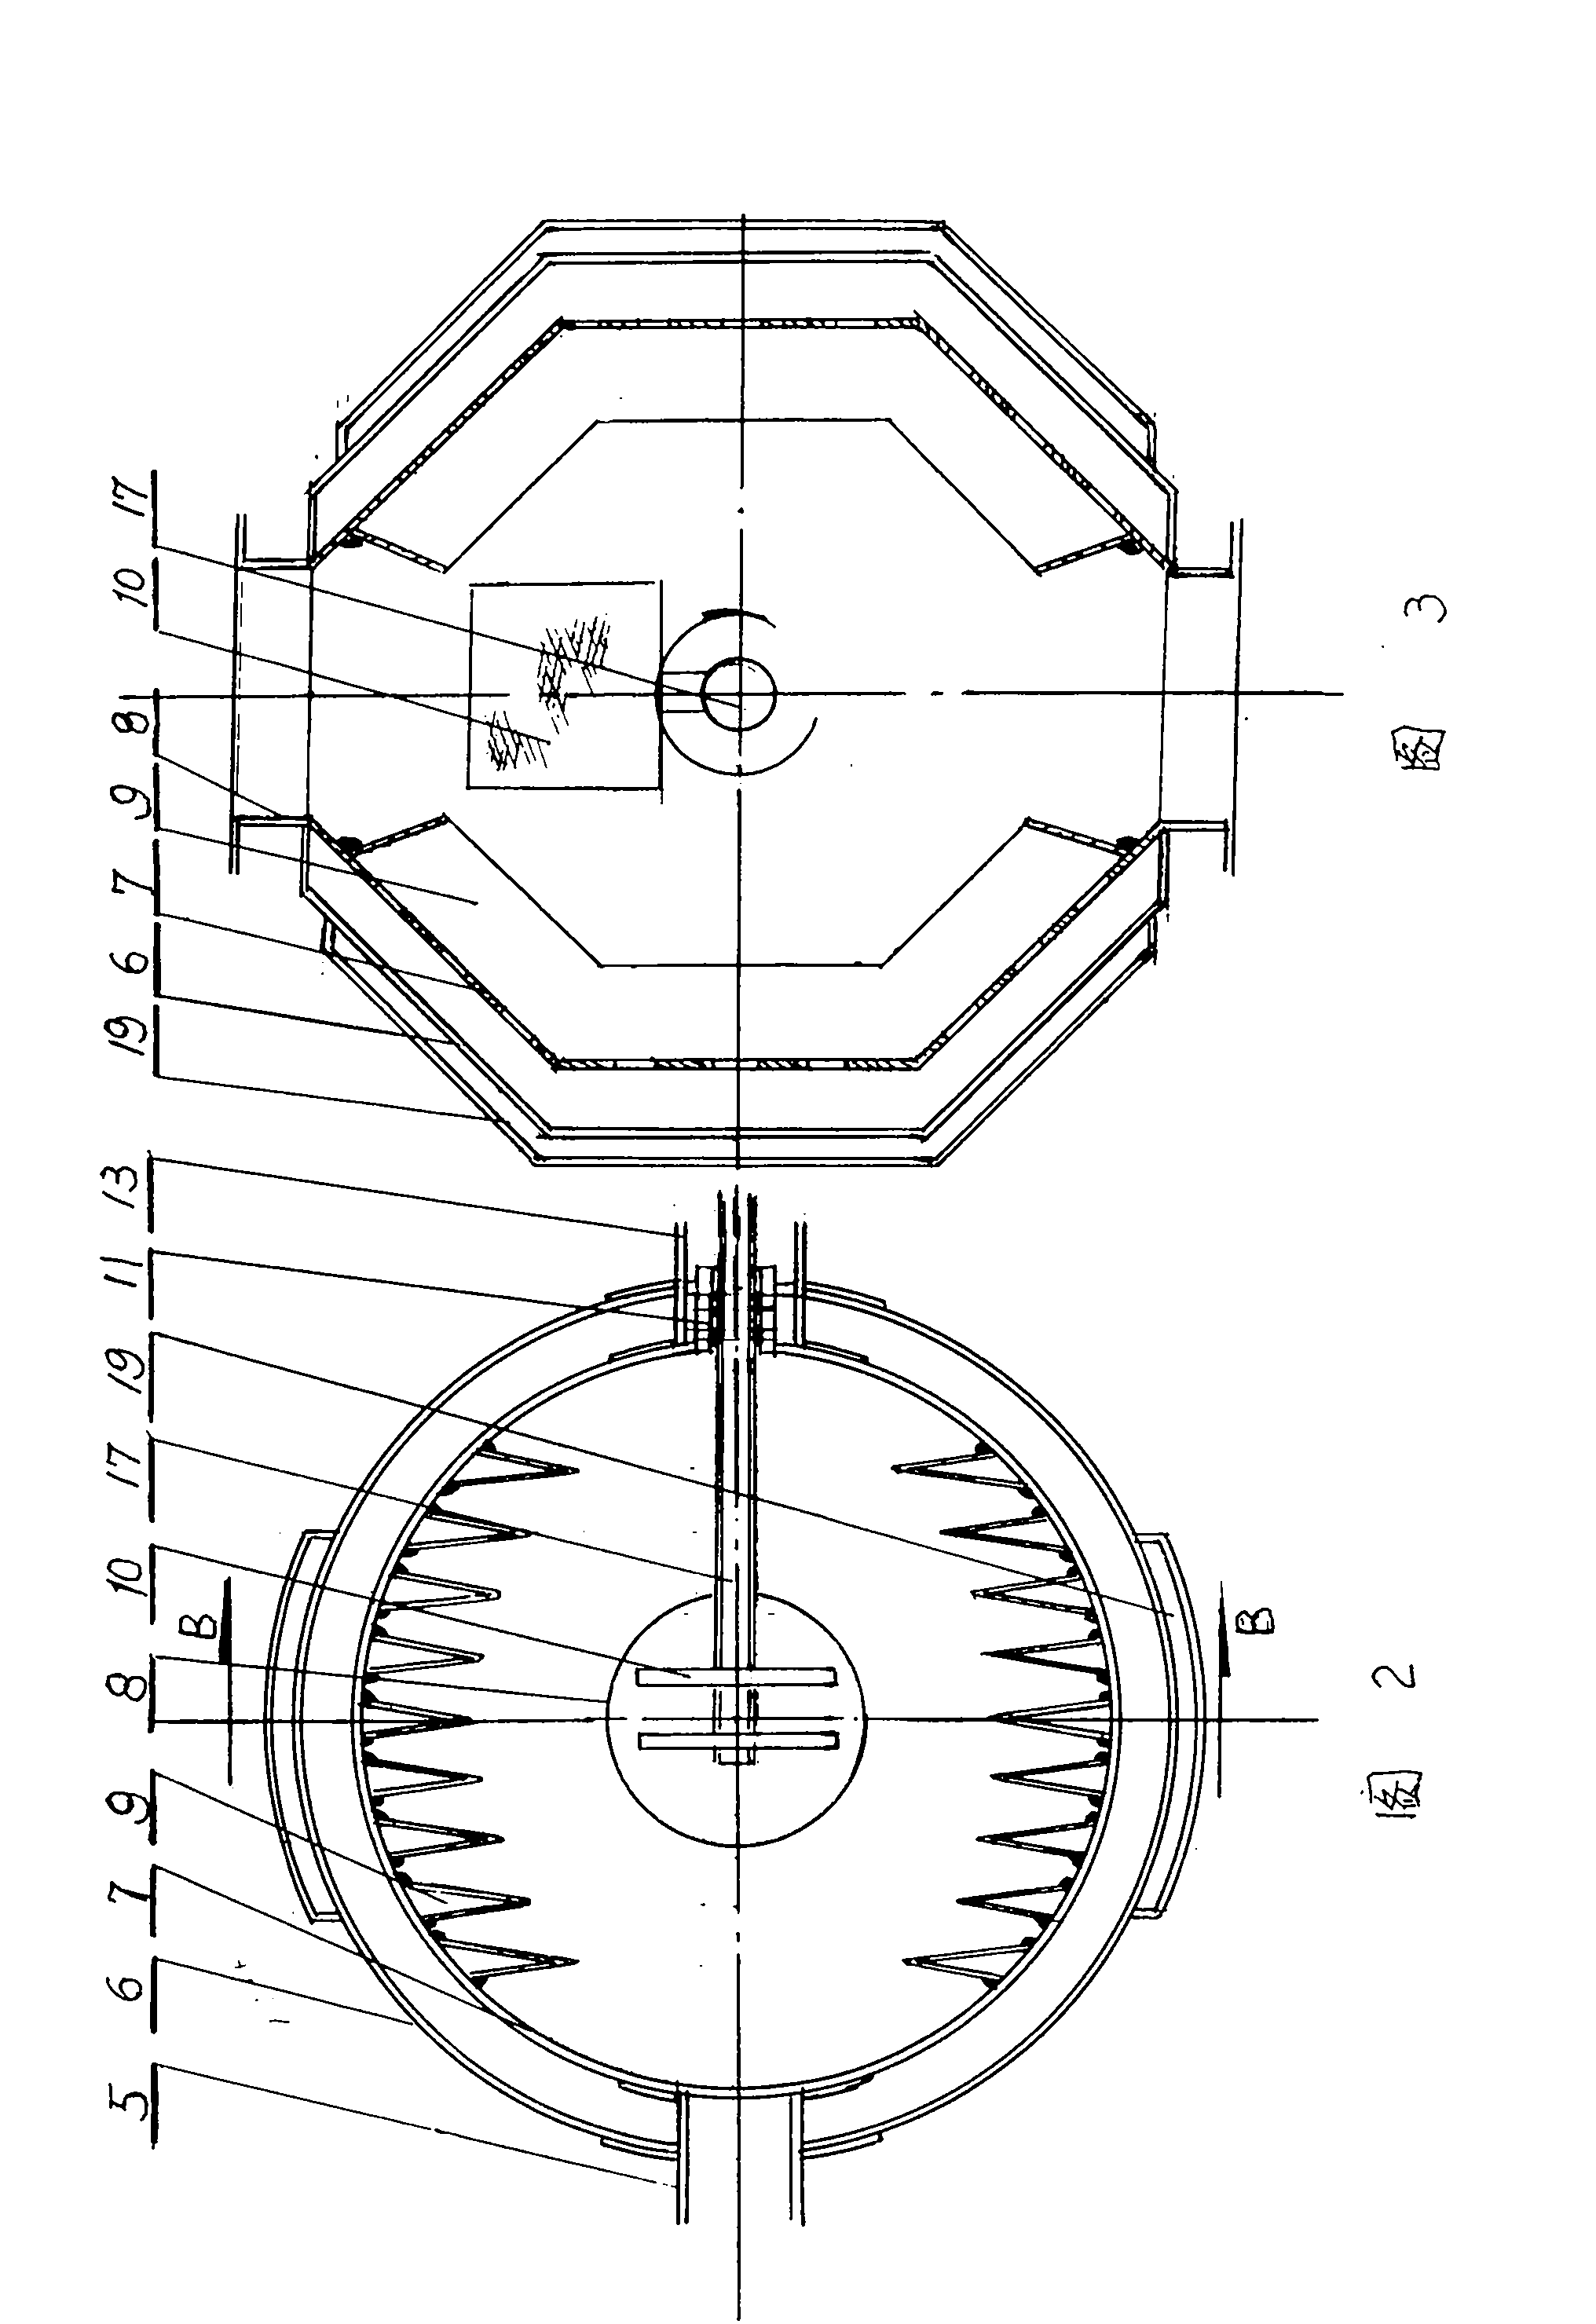 Double-cone vacuum drier with narrow-wedge internal heating plate